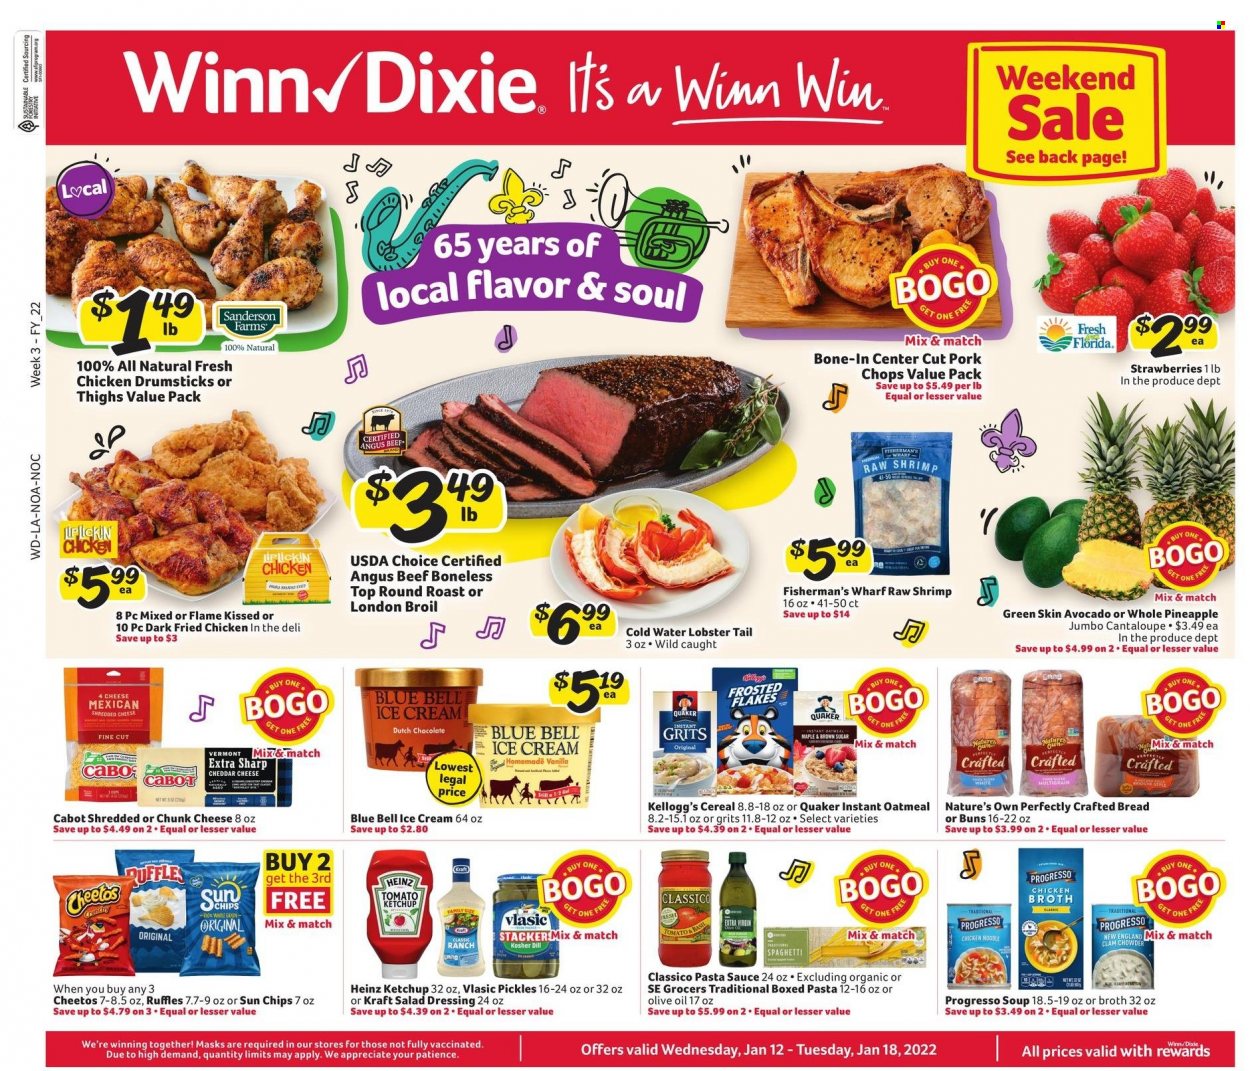 thumbnail - Winn Dixie Flyer - 01/12/2022 - 01/18/2022 - Sales products - bread, buns, cantaloupe, avocado, strawberries, pineapple, lobster, lobster tail, shrimps, pasta sauce, sauce, fried chicken, Quaker, noodles, Progresso, Kraft®, shredded cheese, chunk cheese, ice cream, Blue Bell, Kellogg's, Cheetos, chips, Ruffles, oatmeal, grits, broth, Heinz, pickles, clam chowder, cereals, Frosted Flakes, dill, salad dressing, ketchup, dressing, Classico, extra virgin olive oil, olive oil, oil, chicken drumsticks, beef meat, round roast, Nature's Own. Page 1.